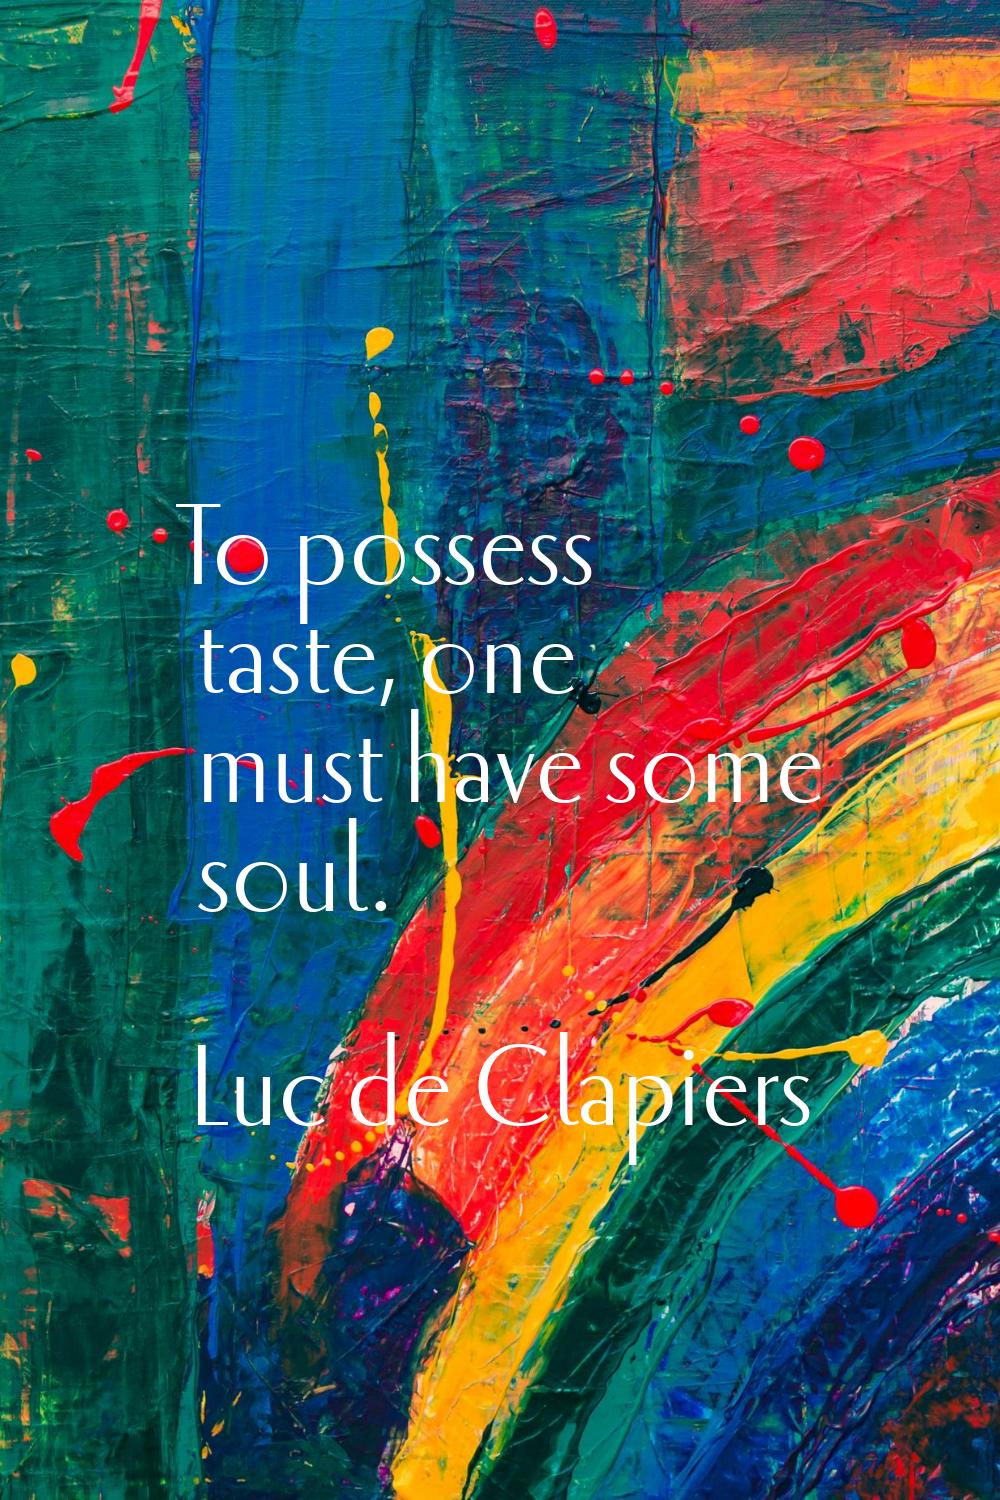 To possess taste, one must have some soul.